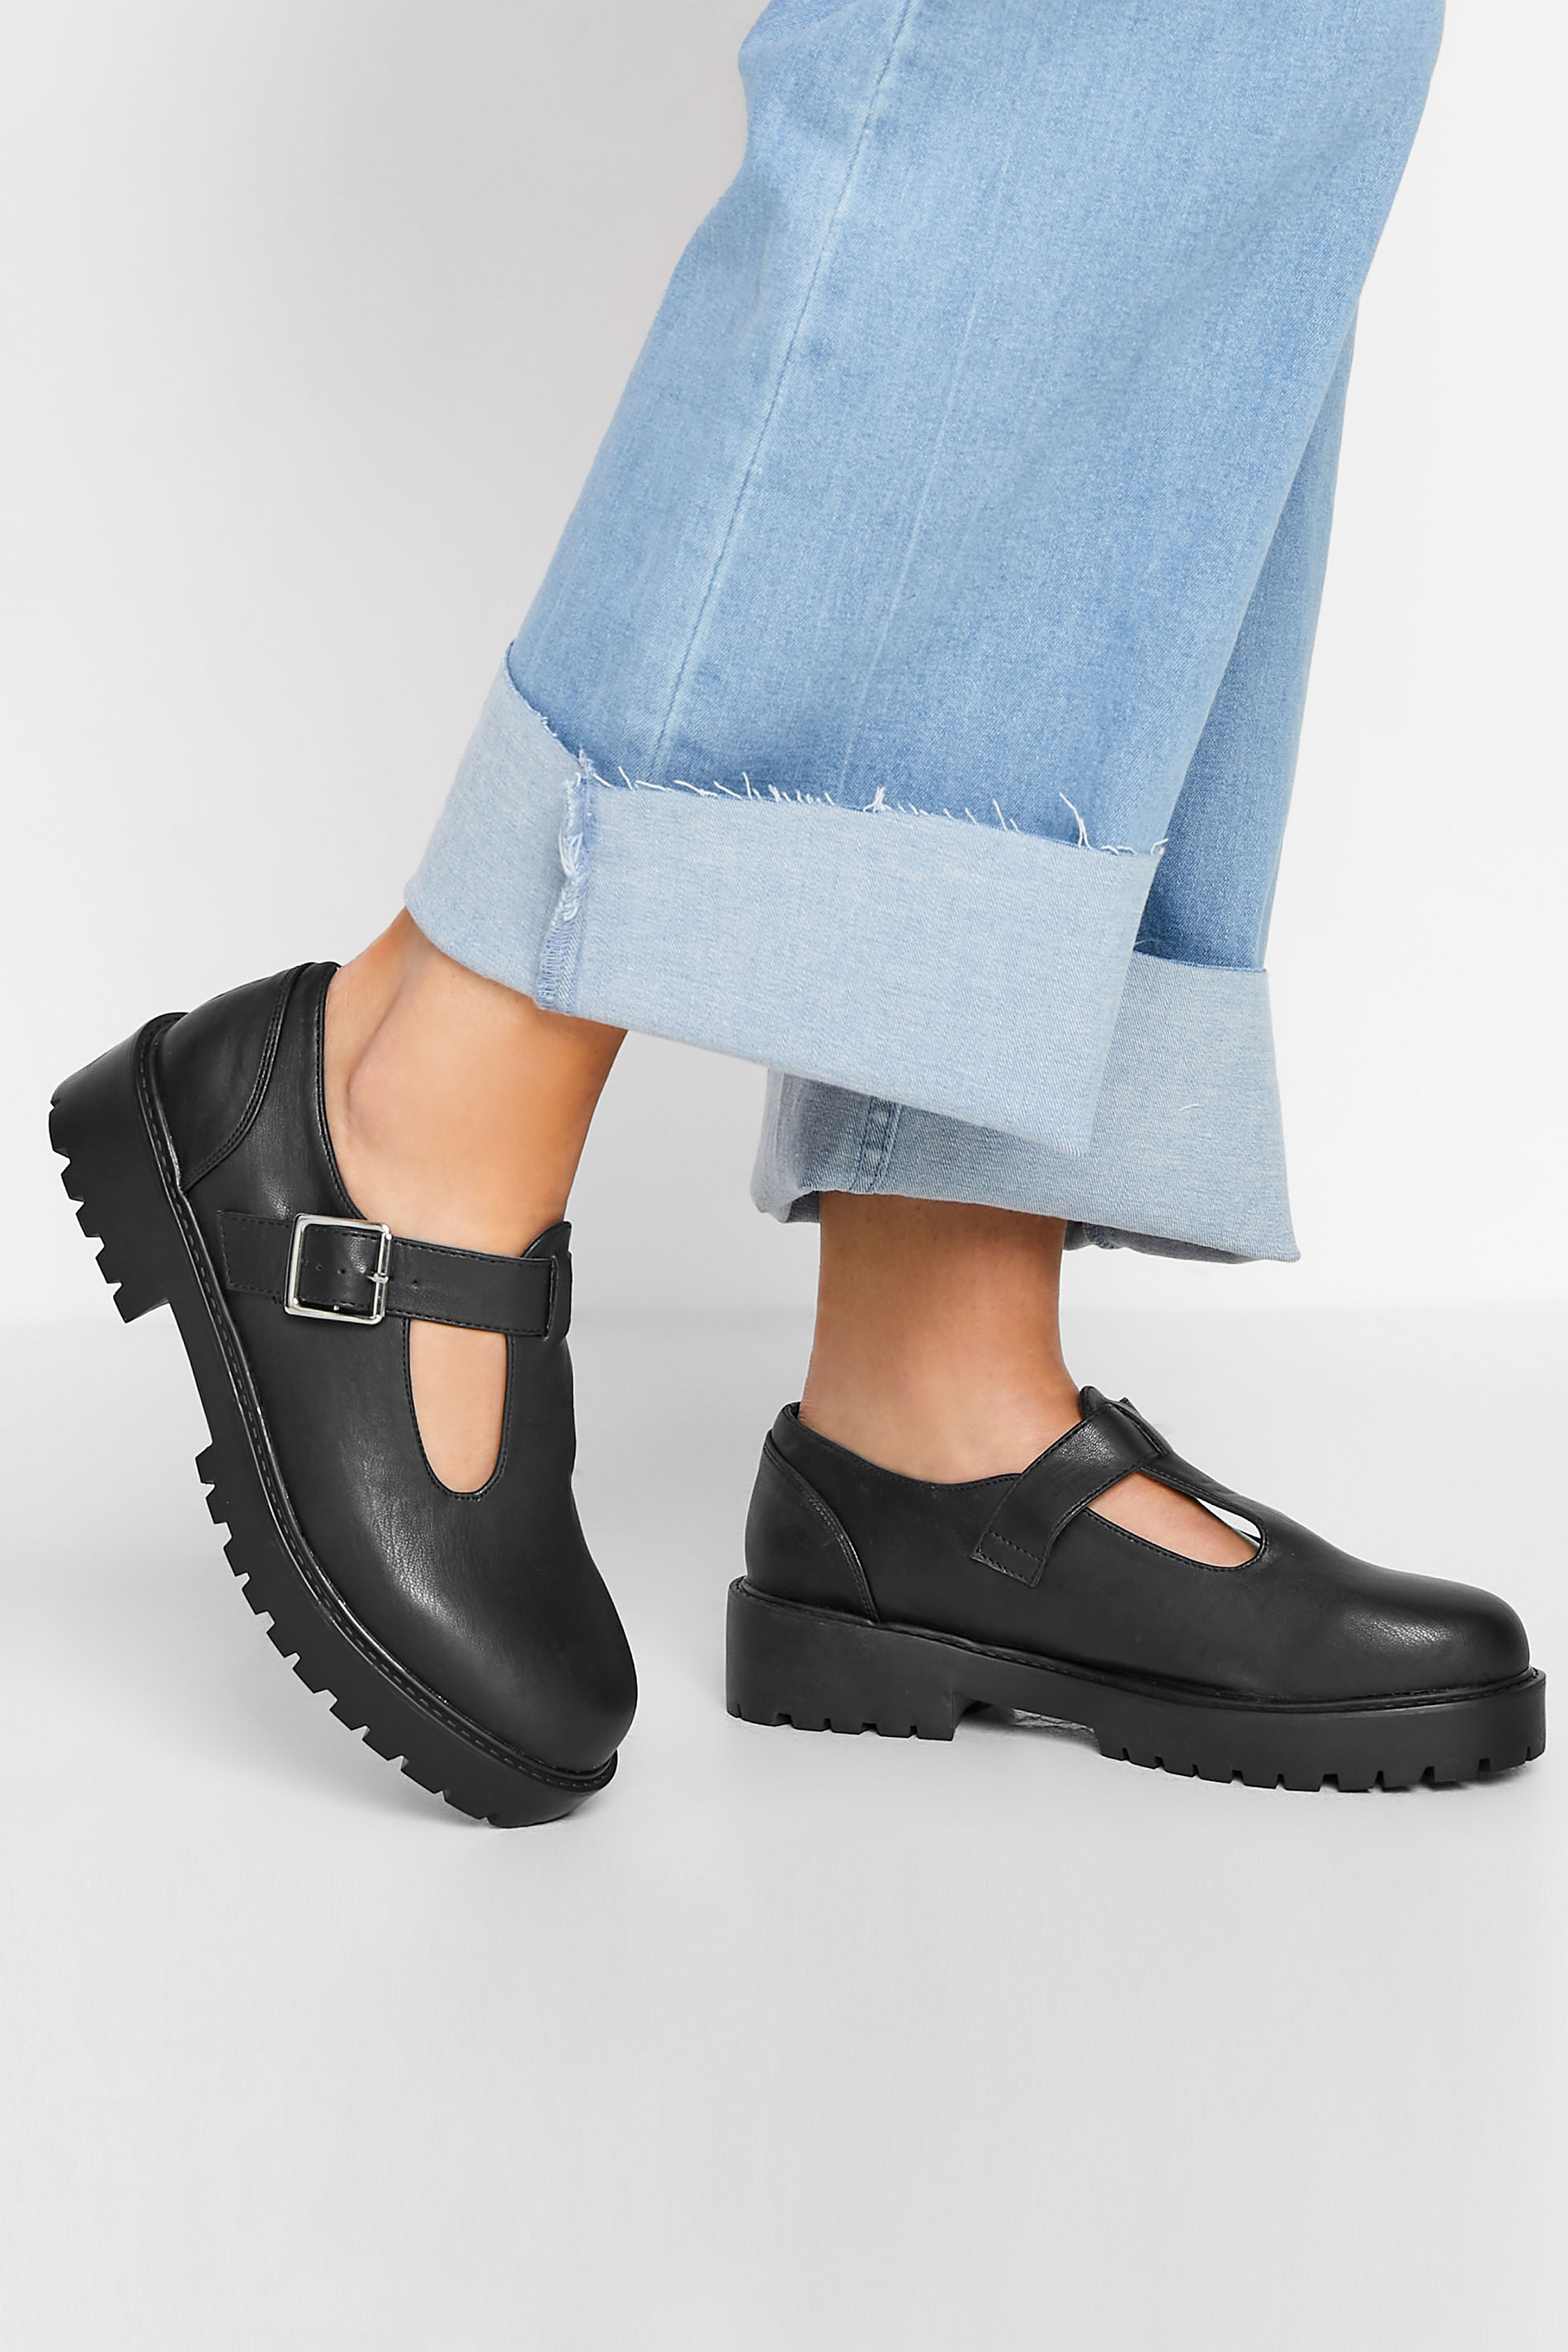 Black Chunky T Bar Mary Jane Shoes In Extra Wide EEE Fit | Yours Clothing 1